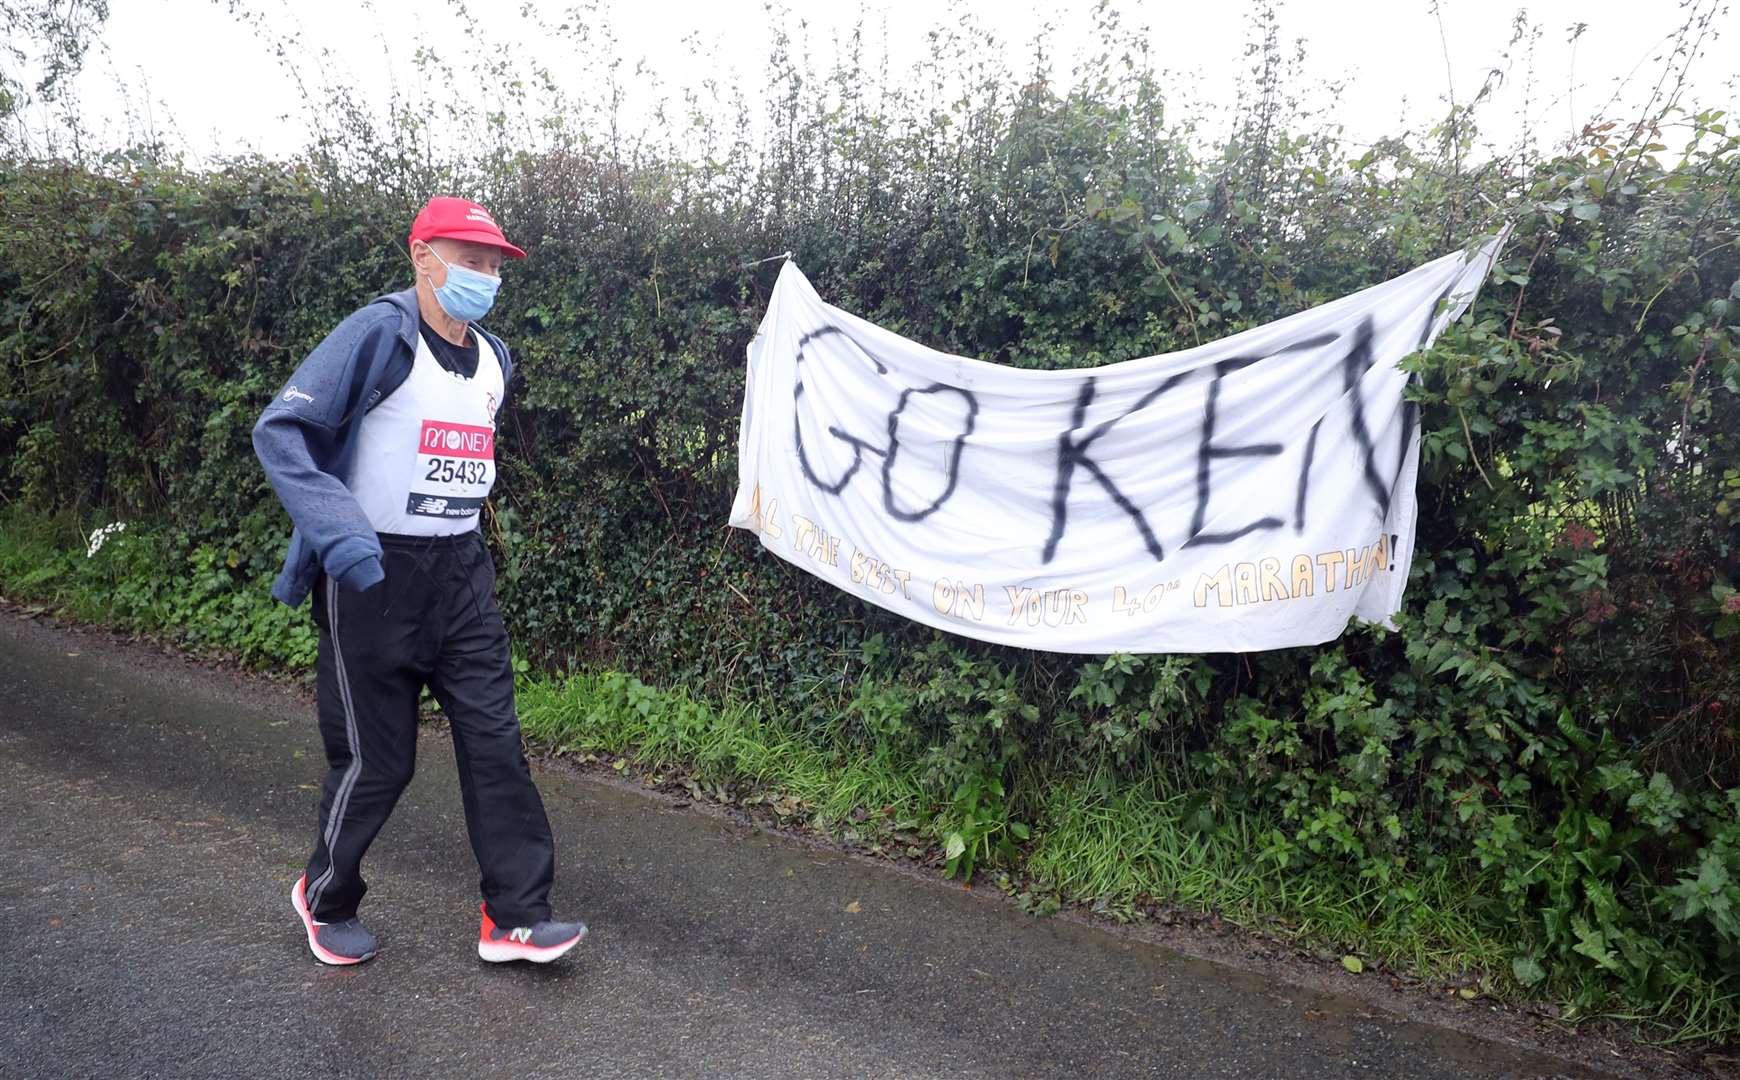 Ken Jones, 87, takes part in the historic first virtual London Marathon during gale-force winds and rain in his home town of Strabane, west Tyrone (Niall Carson/PA)